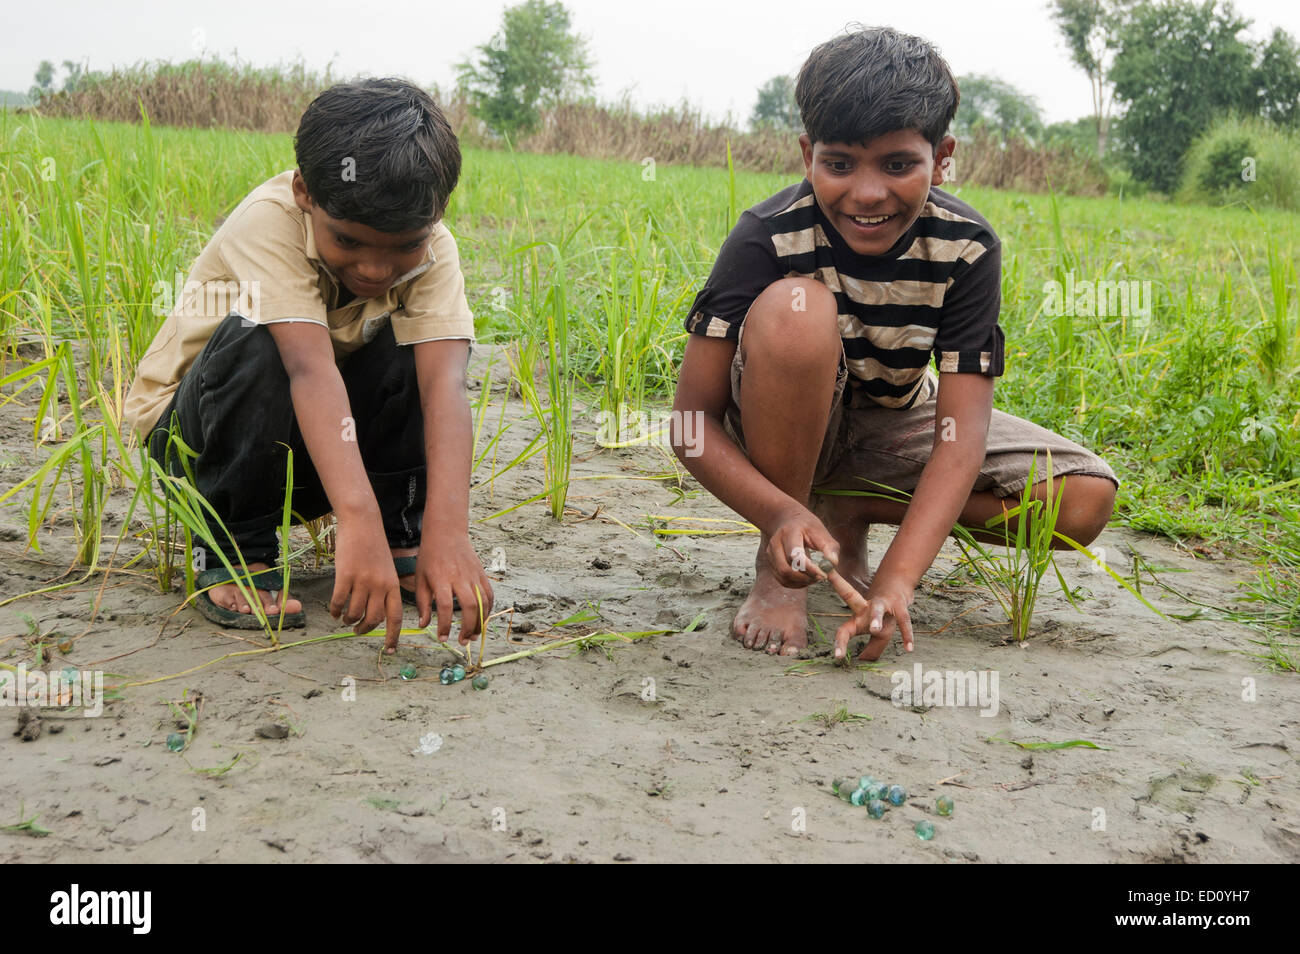 2 indian rural child farm playing Stock Photo